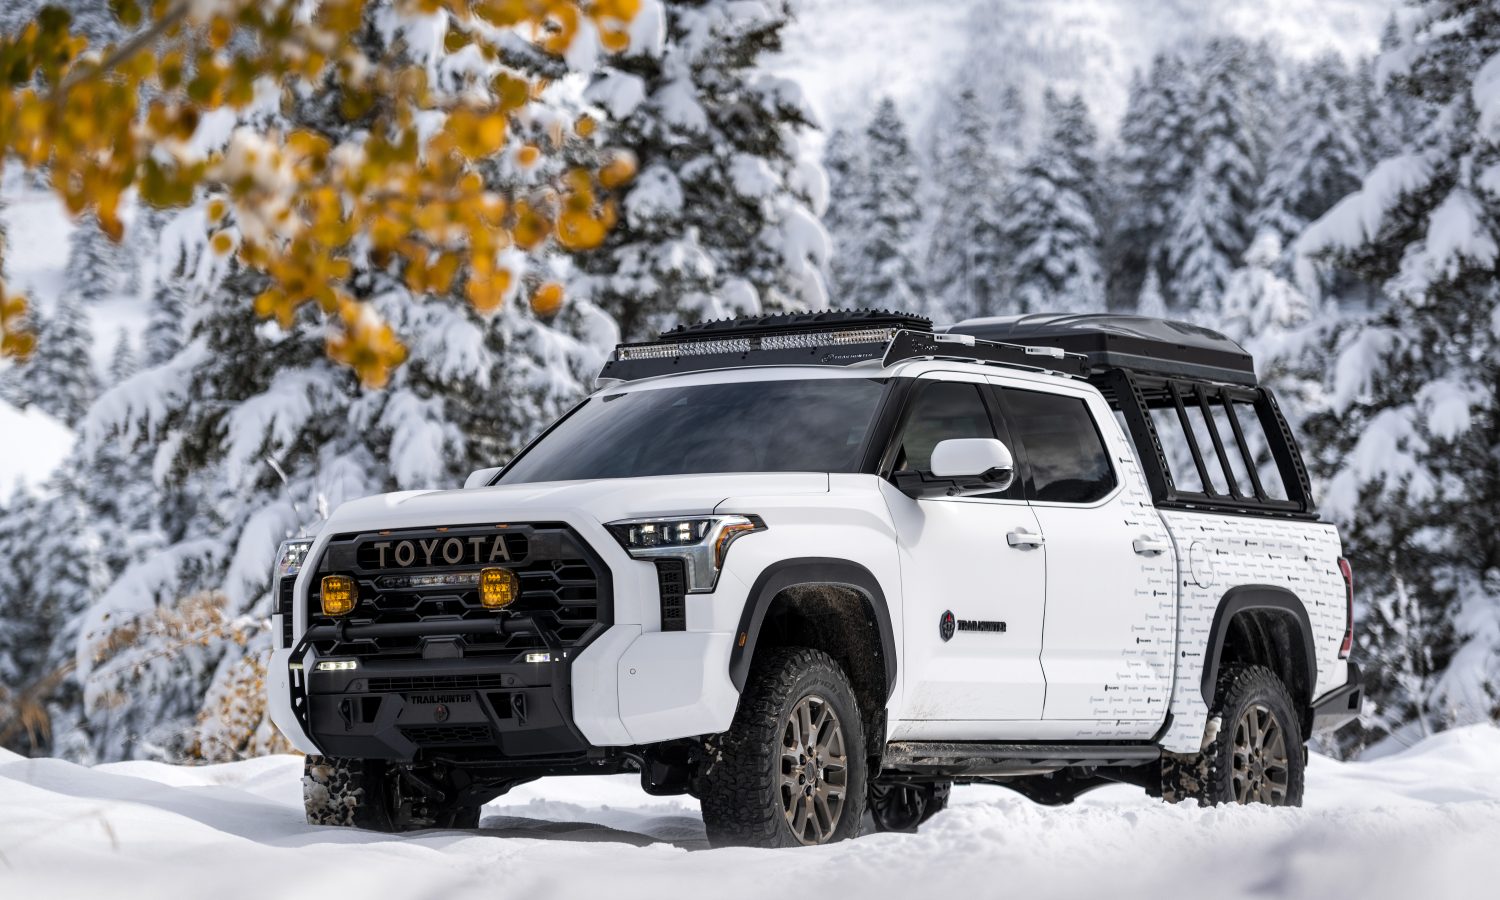 The Toyota Trailhunter Tundra in the snow